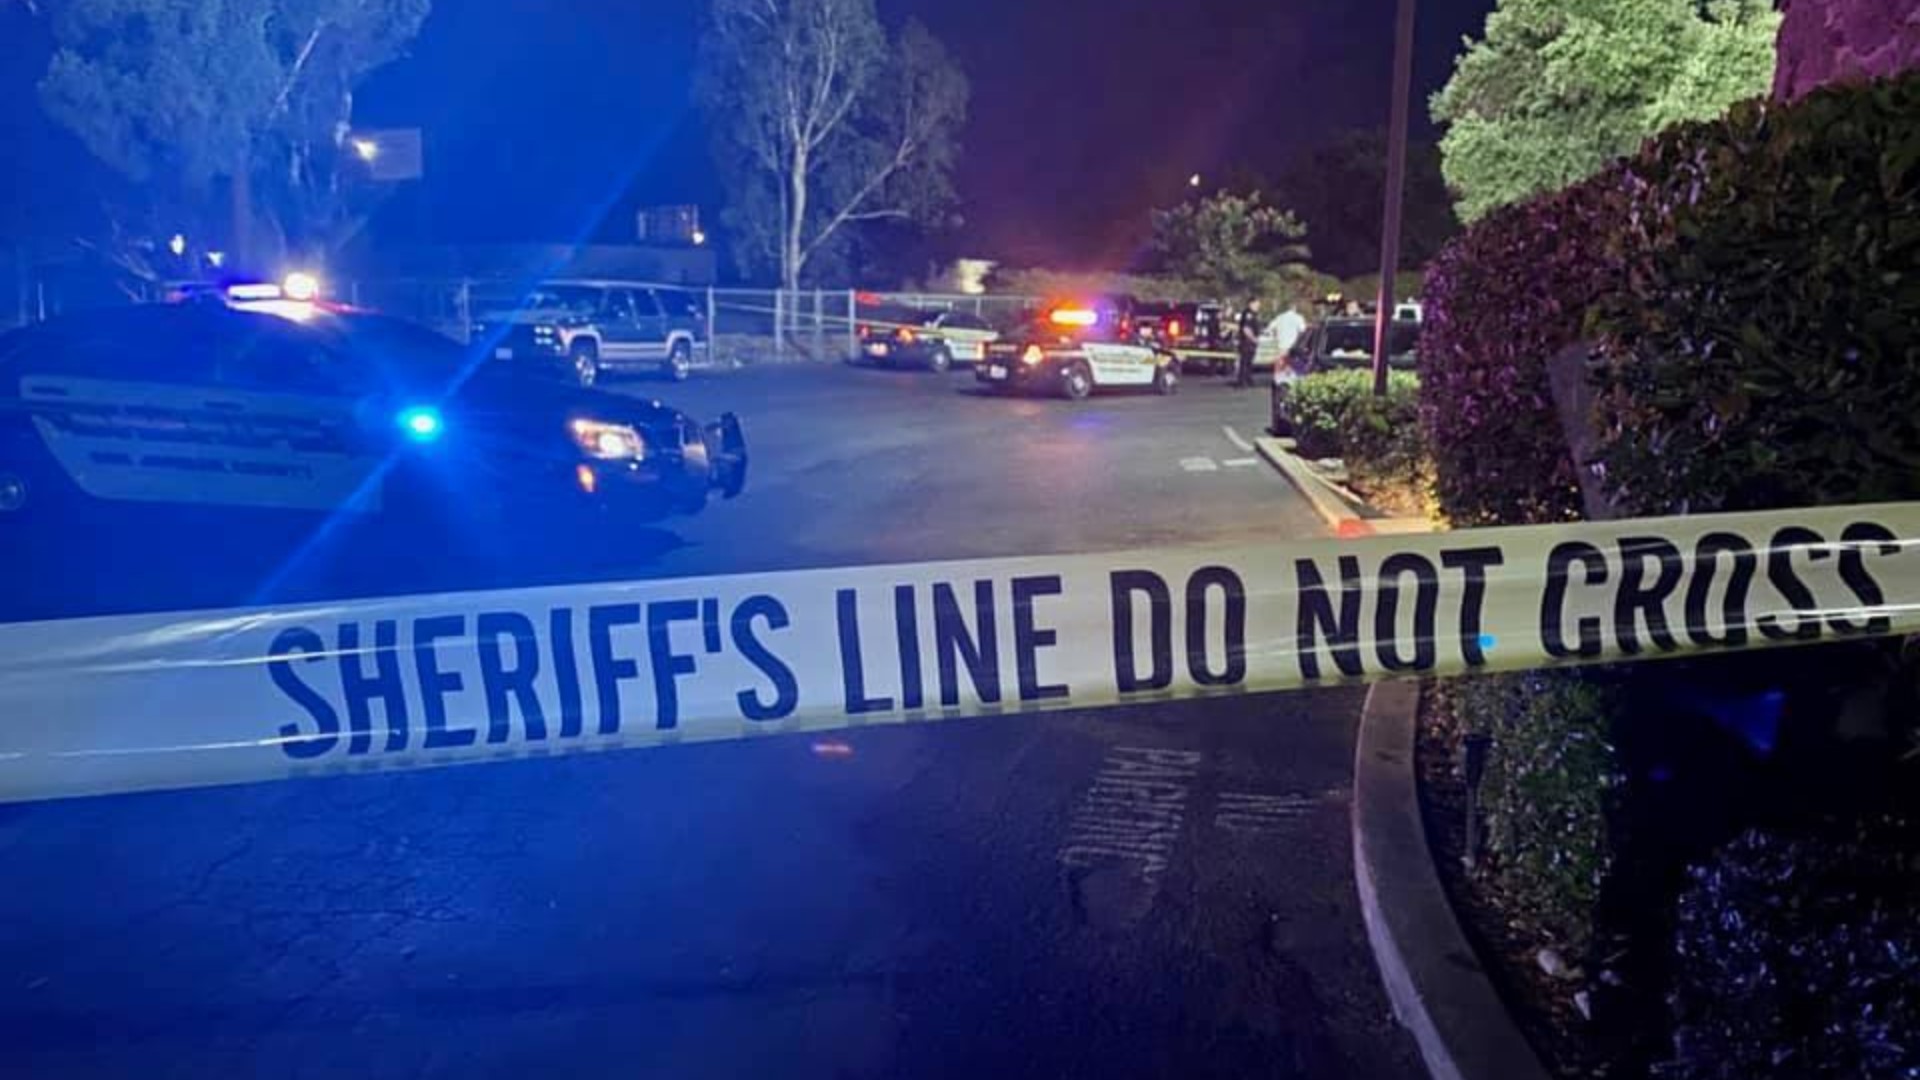 Authorities are investigating a deputy-involved shooting that happened at a Stockton hotel just before midnight on Thursday.